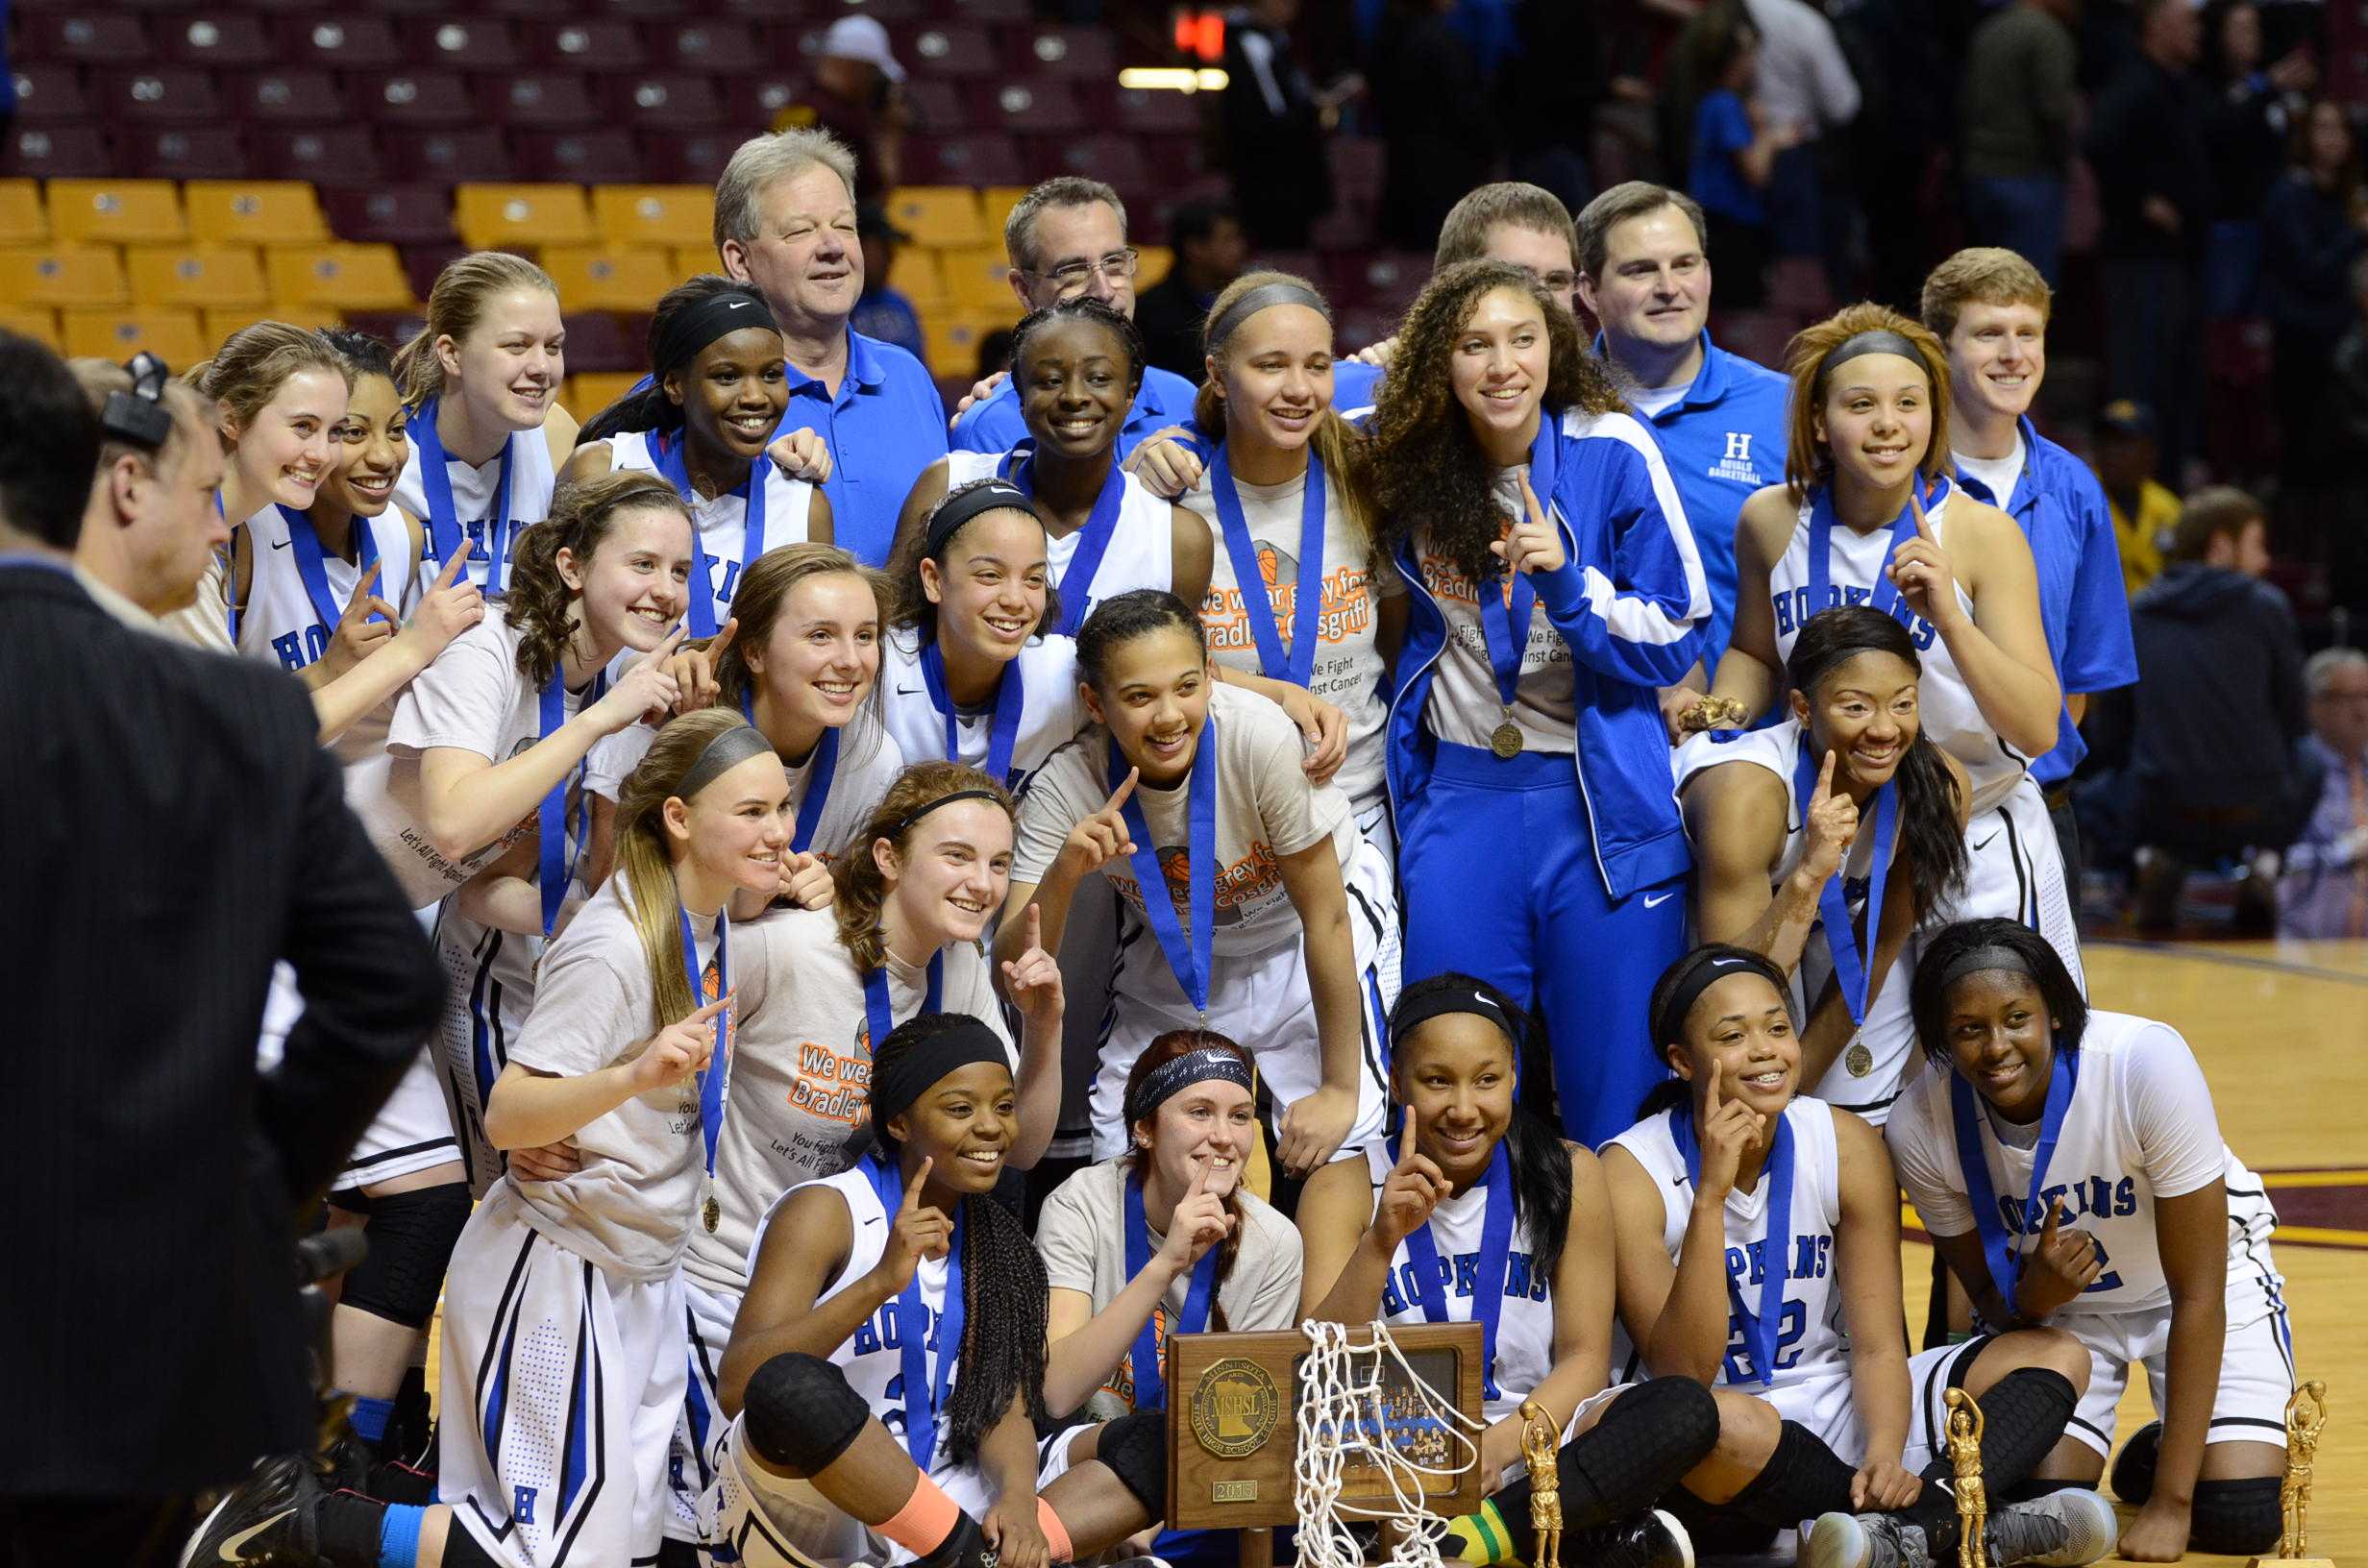 Royal-ty+reigns+again+as+girls+basketball+wins+state+championship